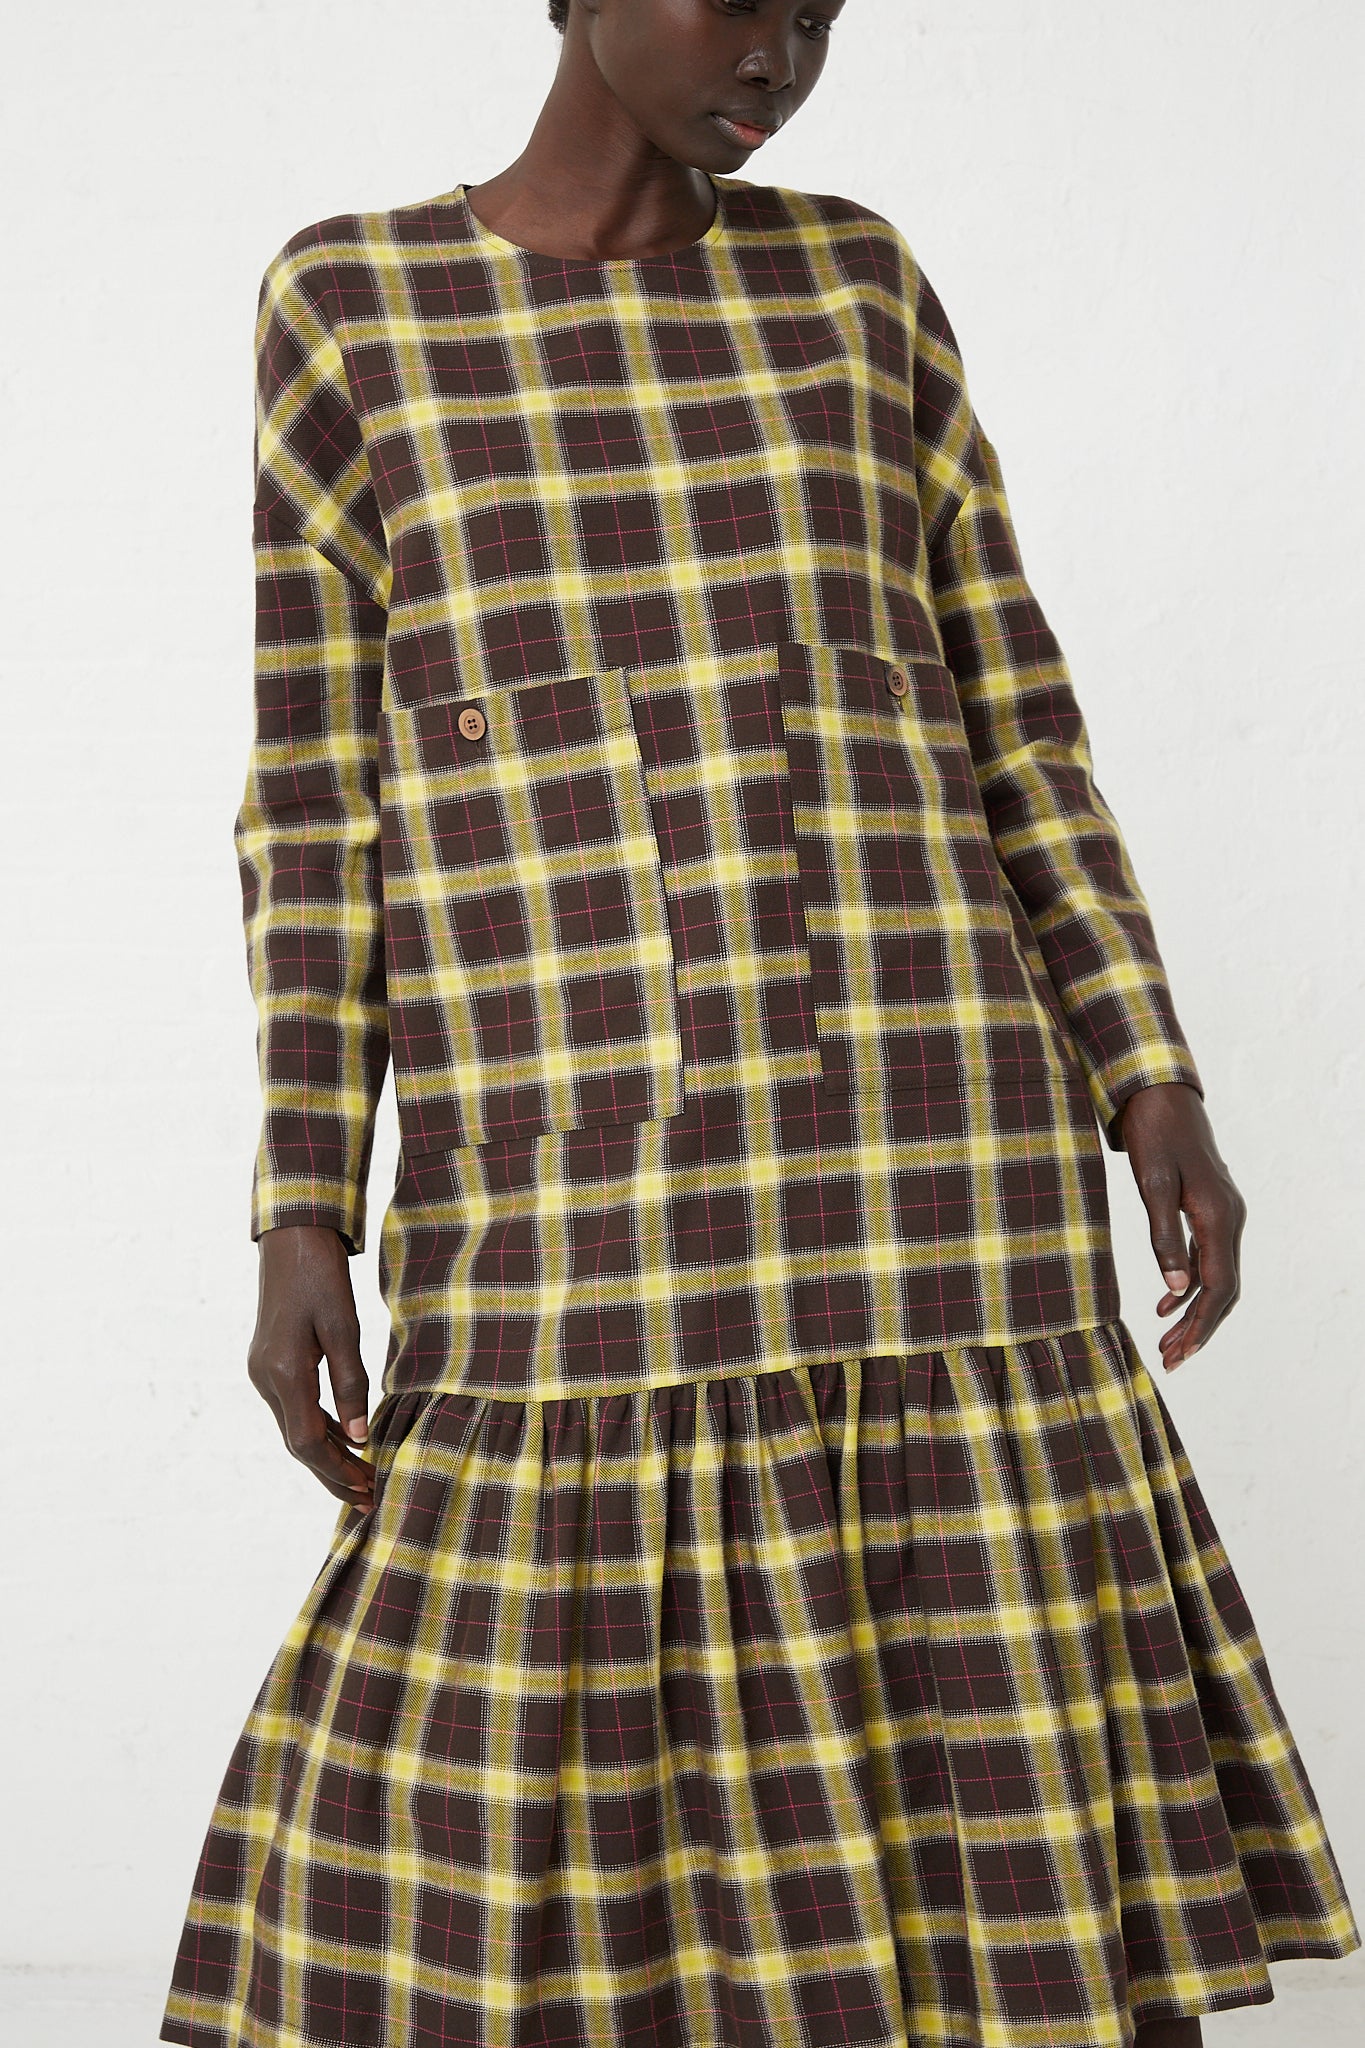 The model is wearing a Fun Dress in Check Brown, Yellow and Pink by AVN, featuring oversized patch pockets.